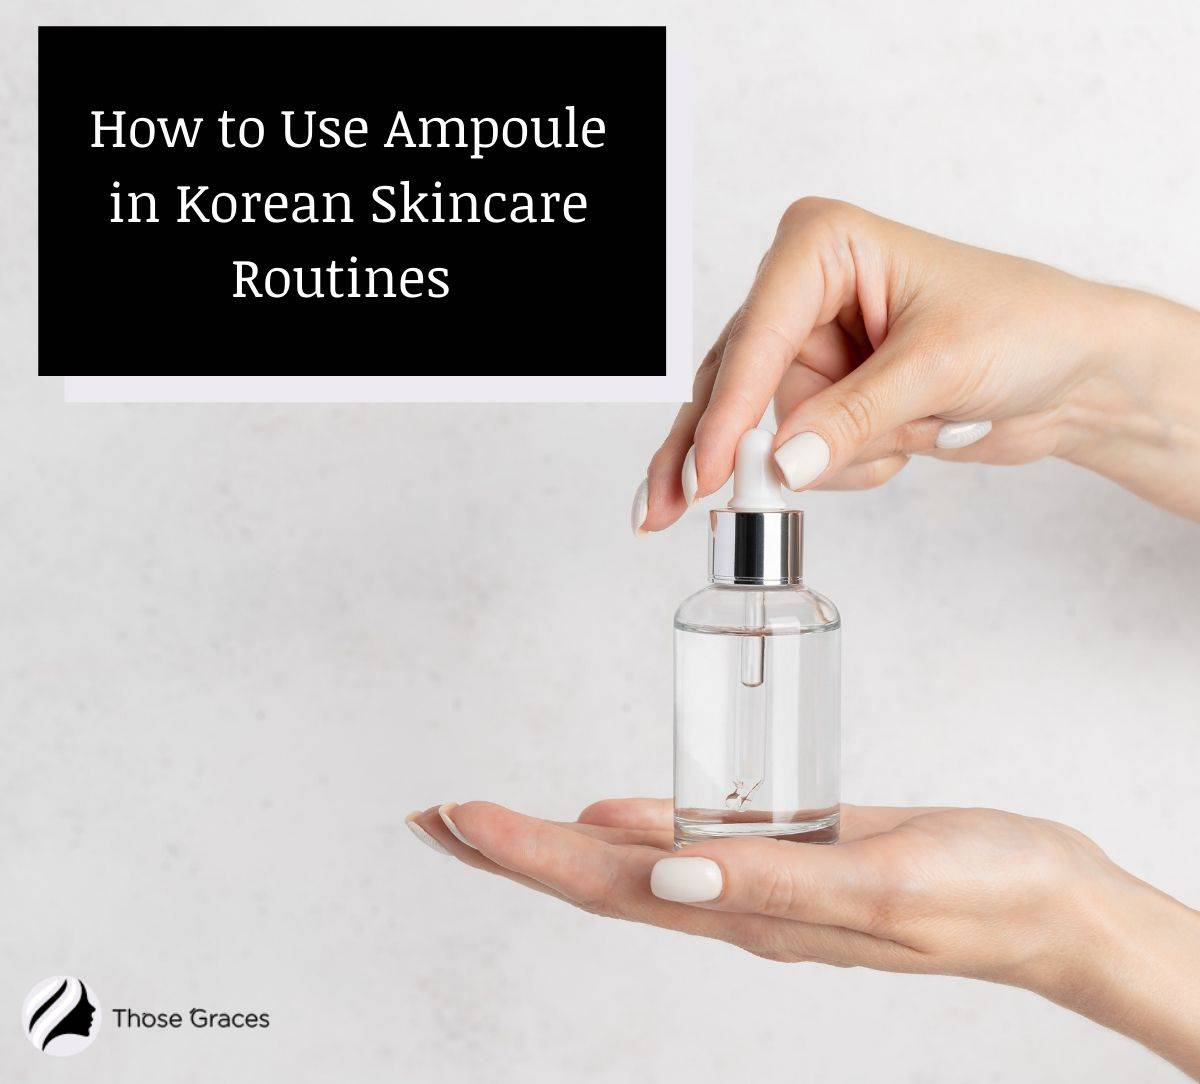 a lady showing an ampoule but how to you use ampoule in Korean Skincare?